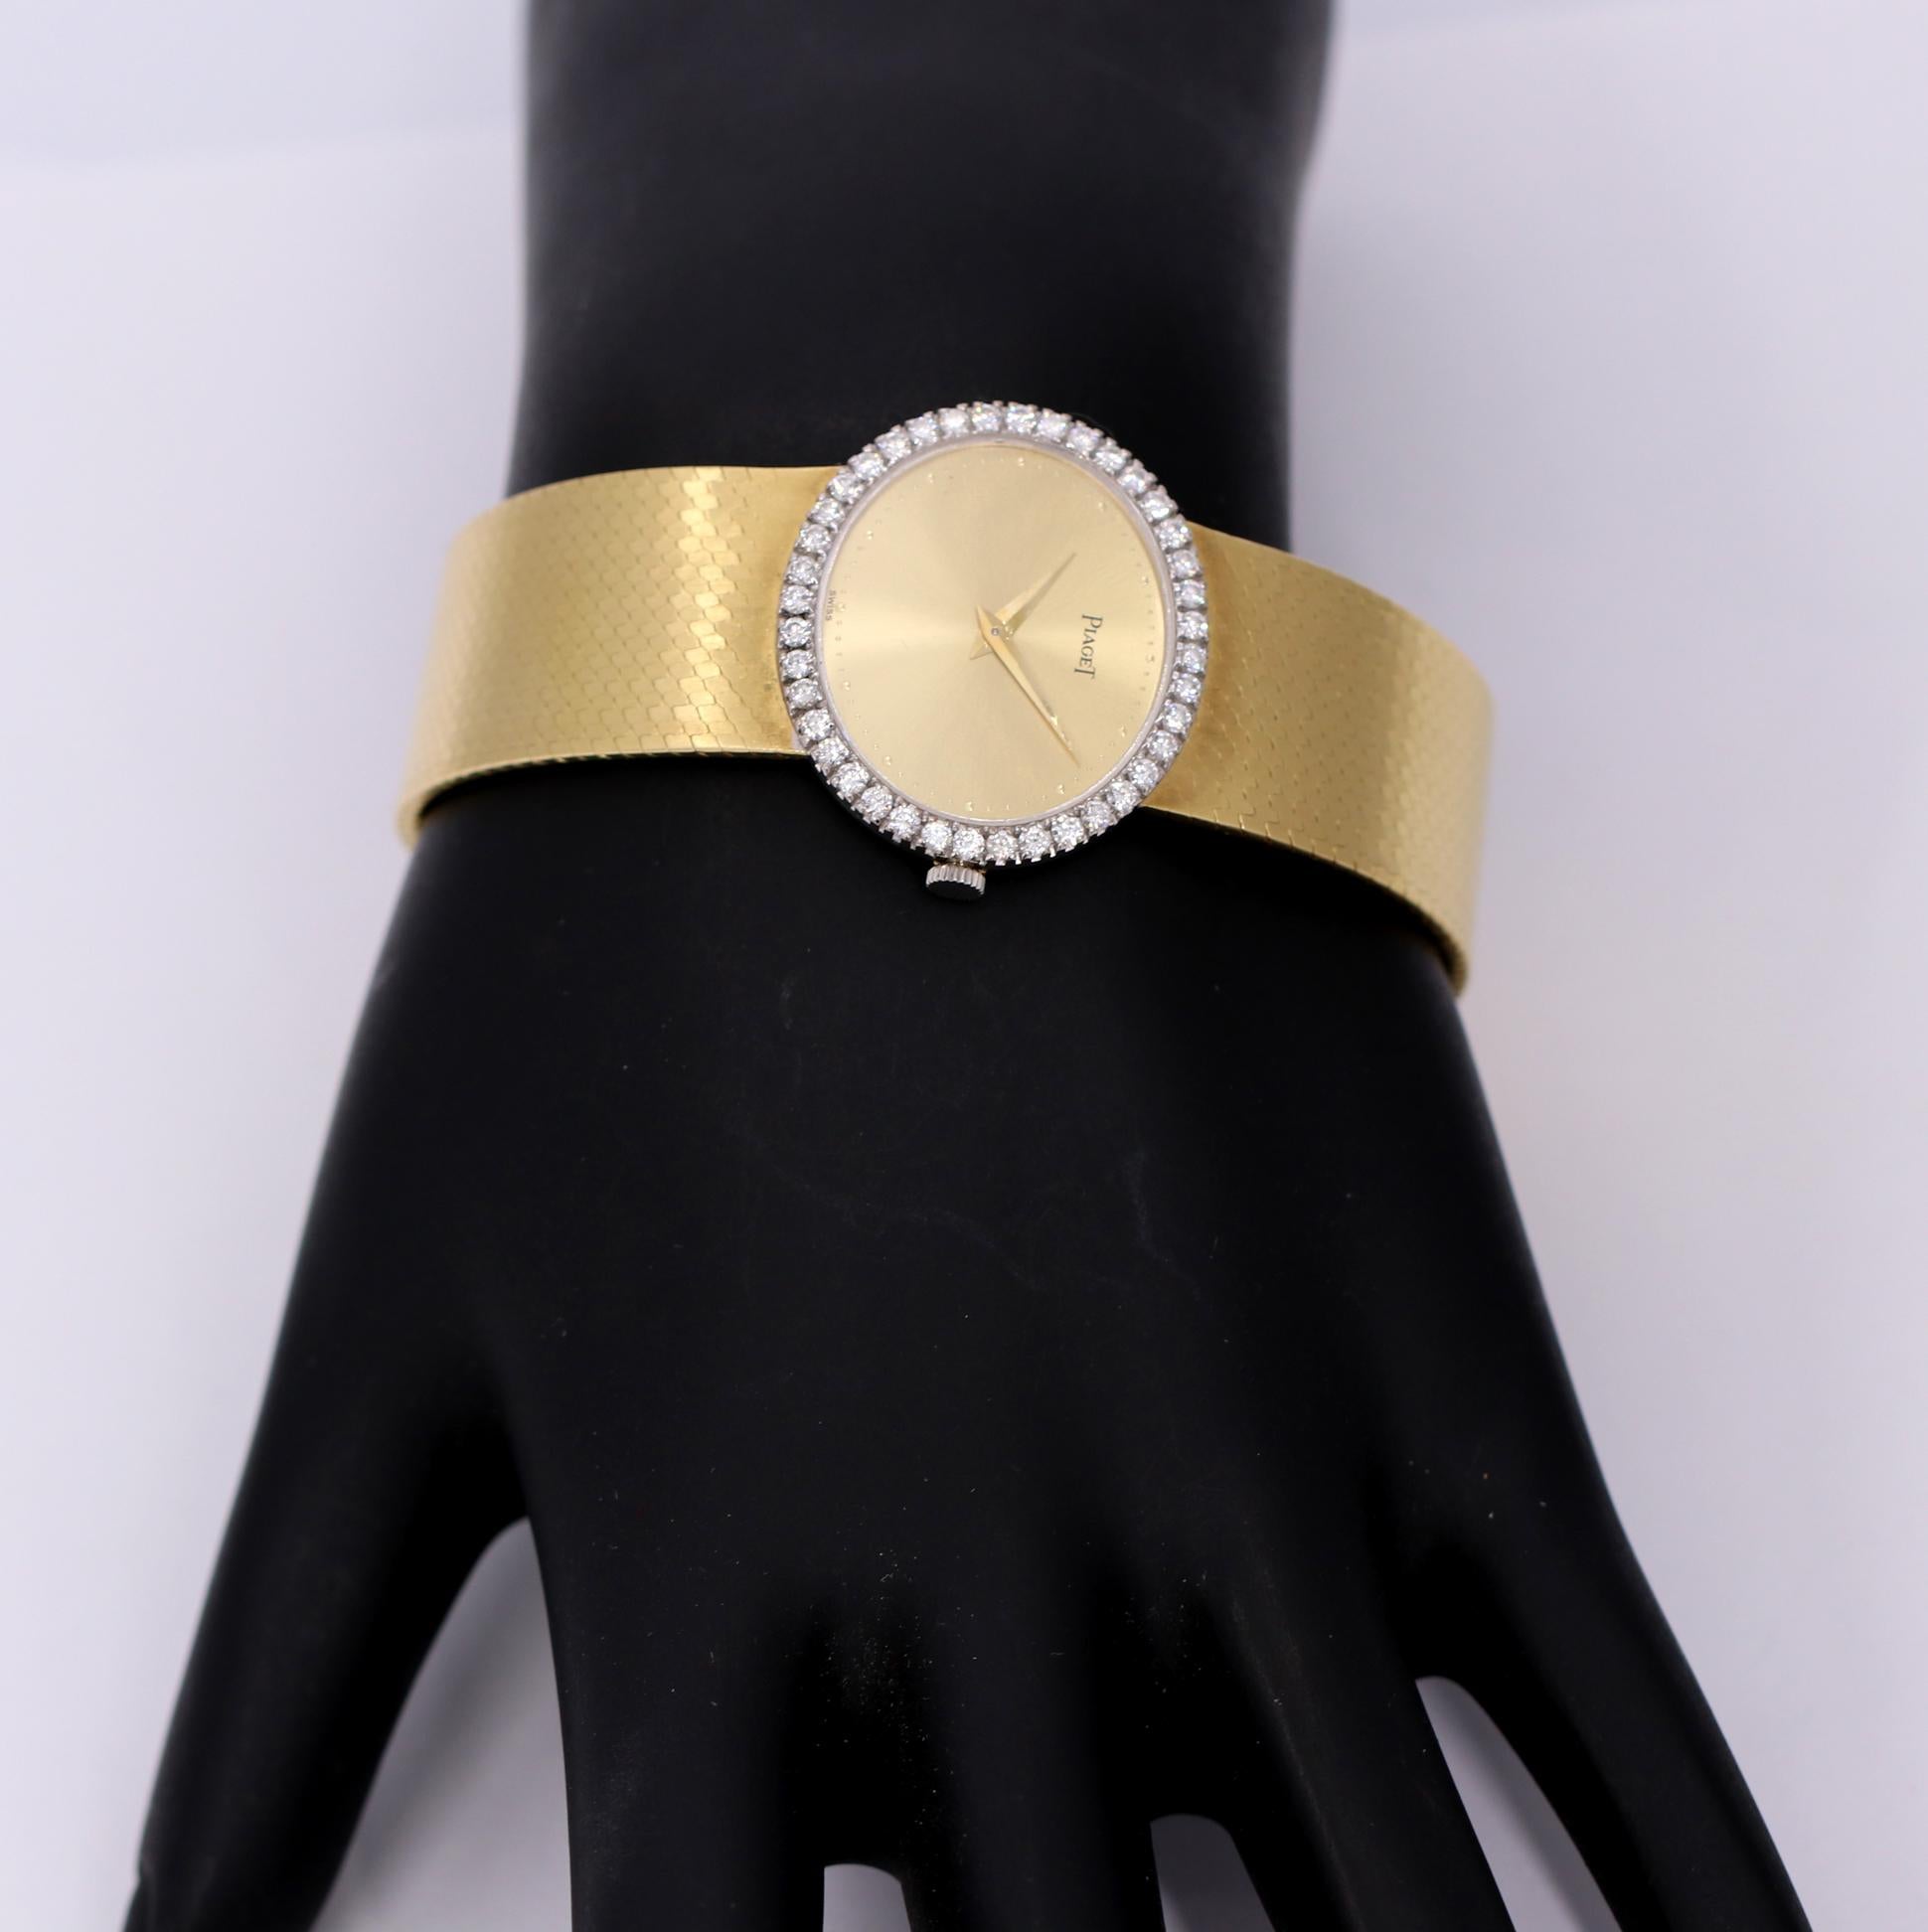 A ladies 18K yellow gold wristwatch, set with 40 round brilliant cut diamonds. Measuring a little over an inch wide this horizontal oval watch features a champagne gold dial. This vintage watch will fit a wrist up to 6 3/4 inches. Overall weight is